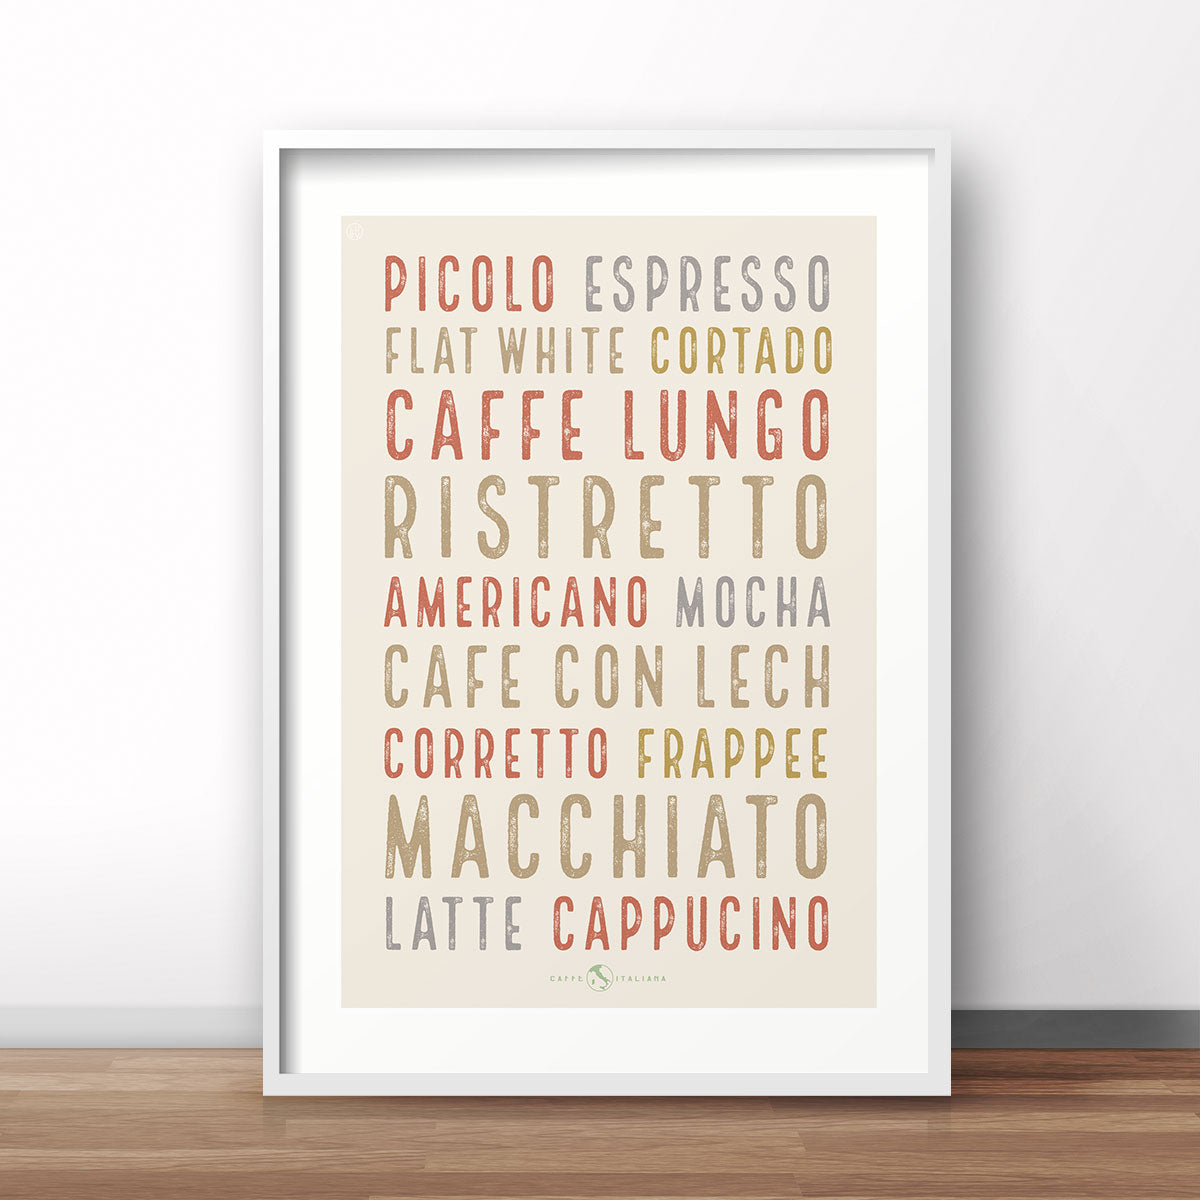 Retro vintage light Italian Coffee poster print from Places We Luv